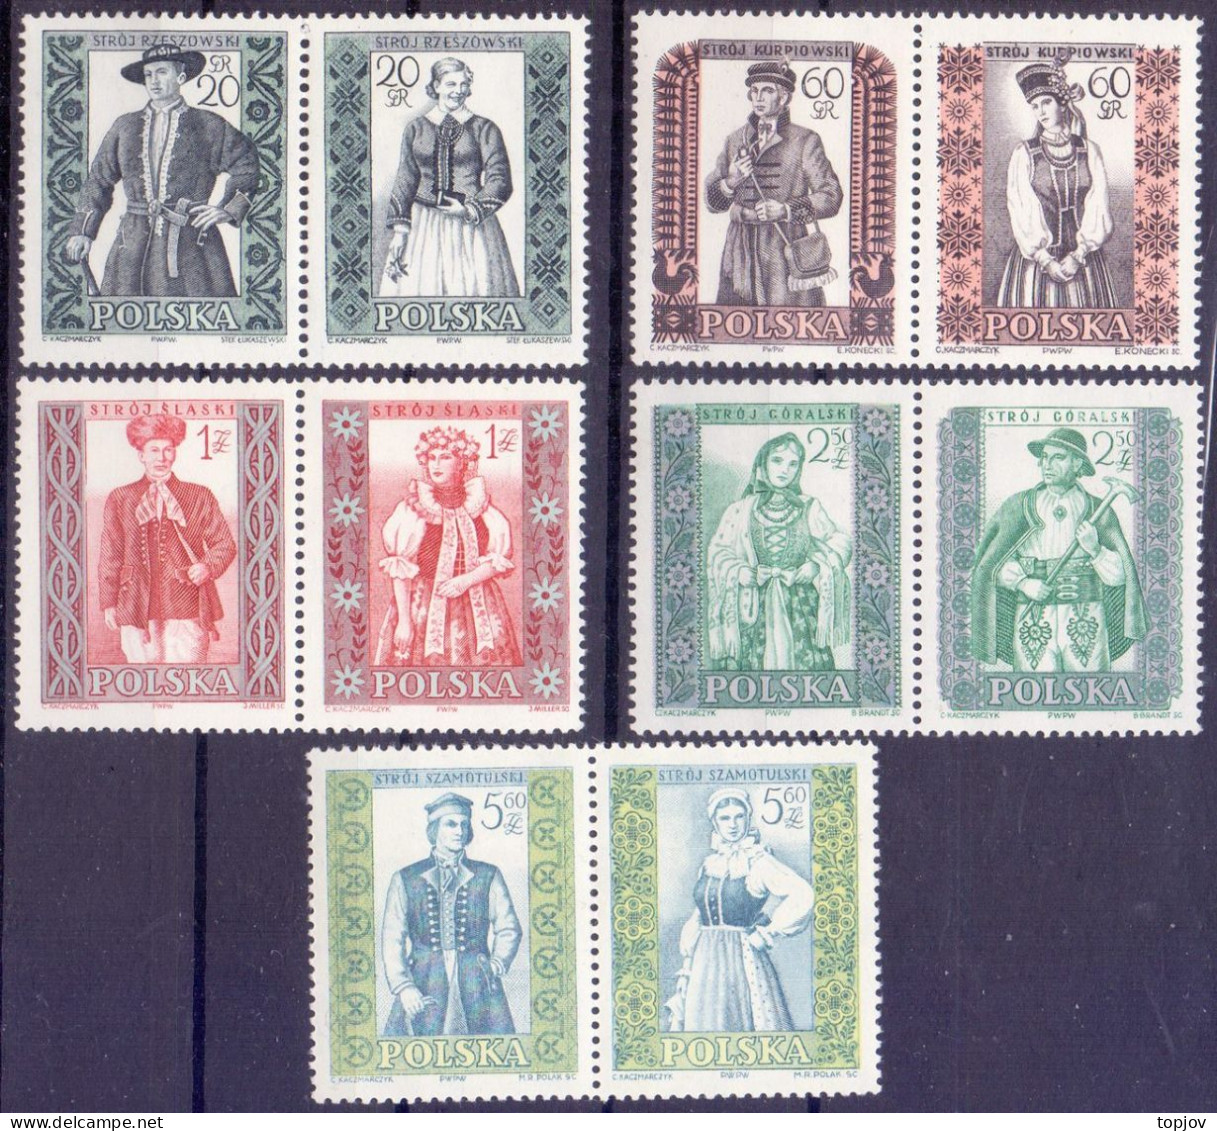 POLAND - COSTUMES - **MNH - 1959 - Unused Stamps